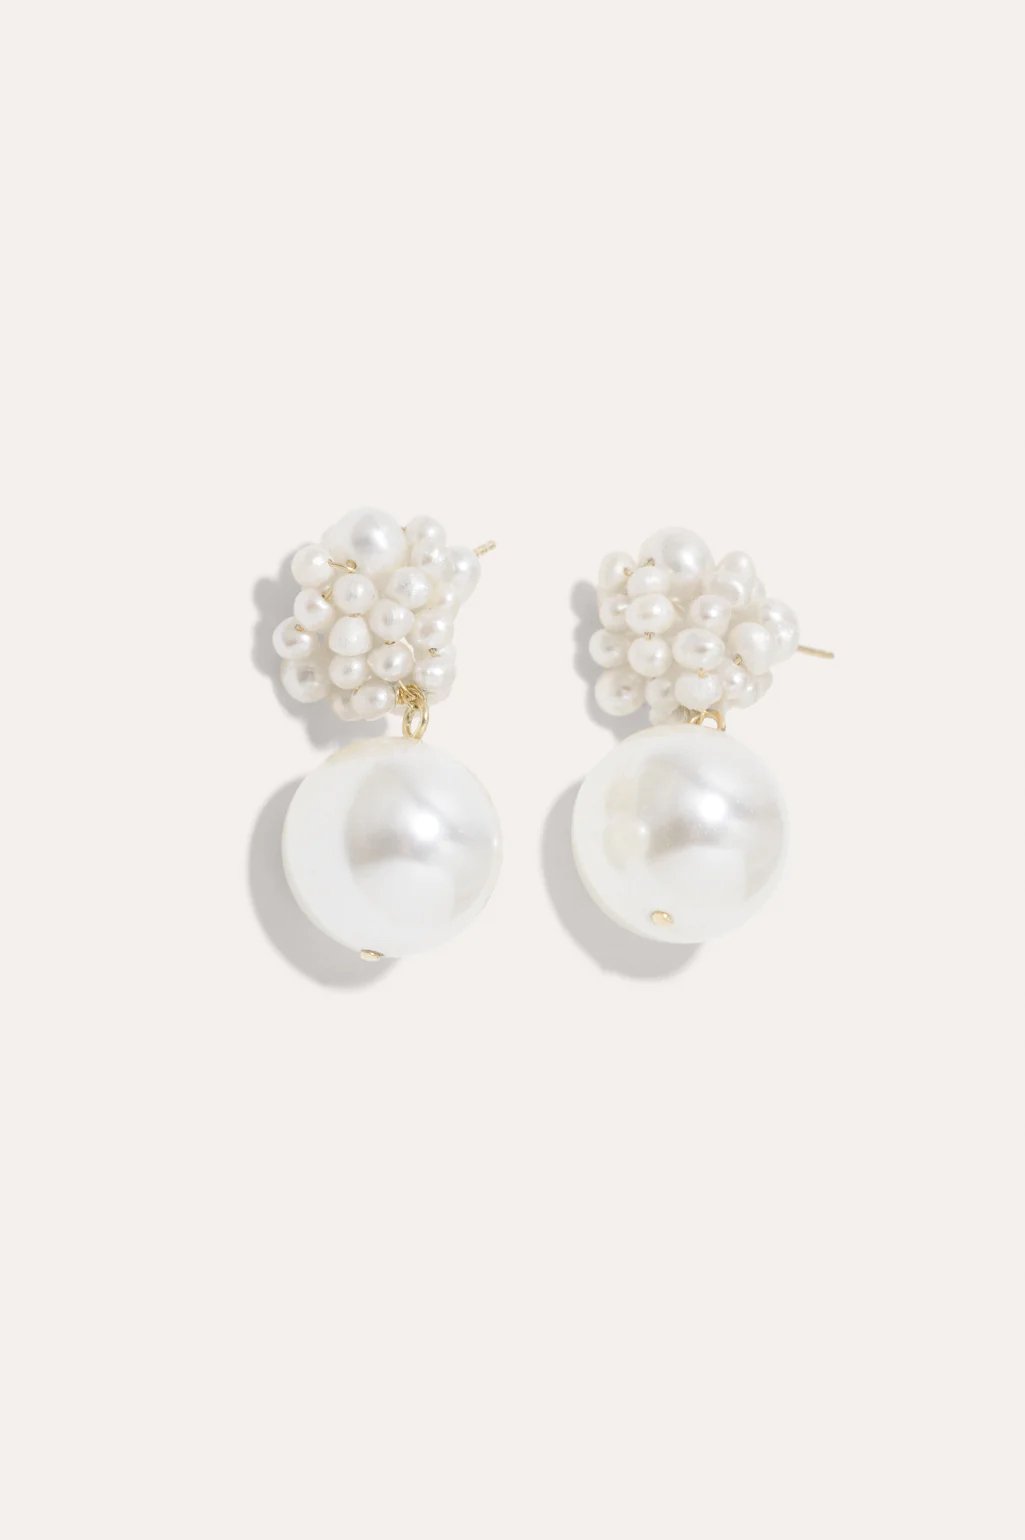 Crumple Gold Vermeil, Pearl and Ceramic Earrings by Completedworks ...